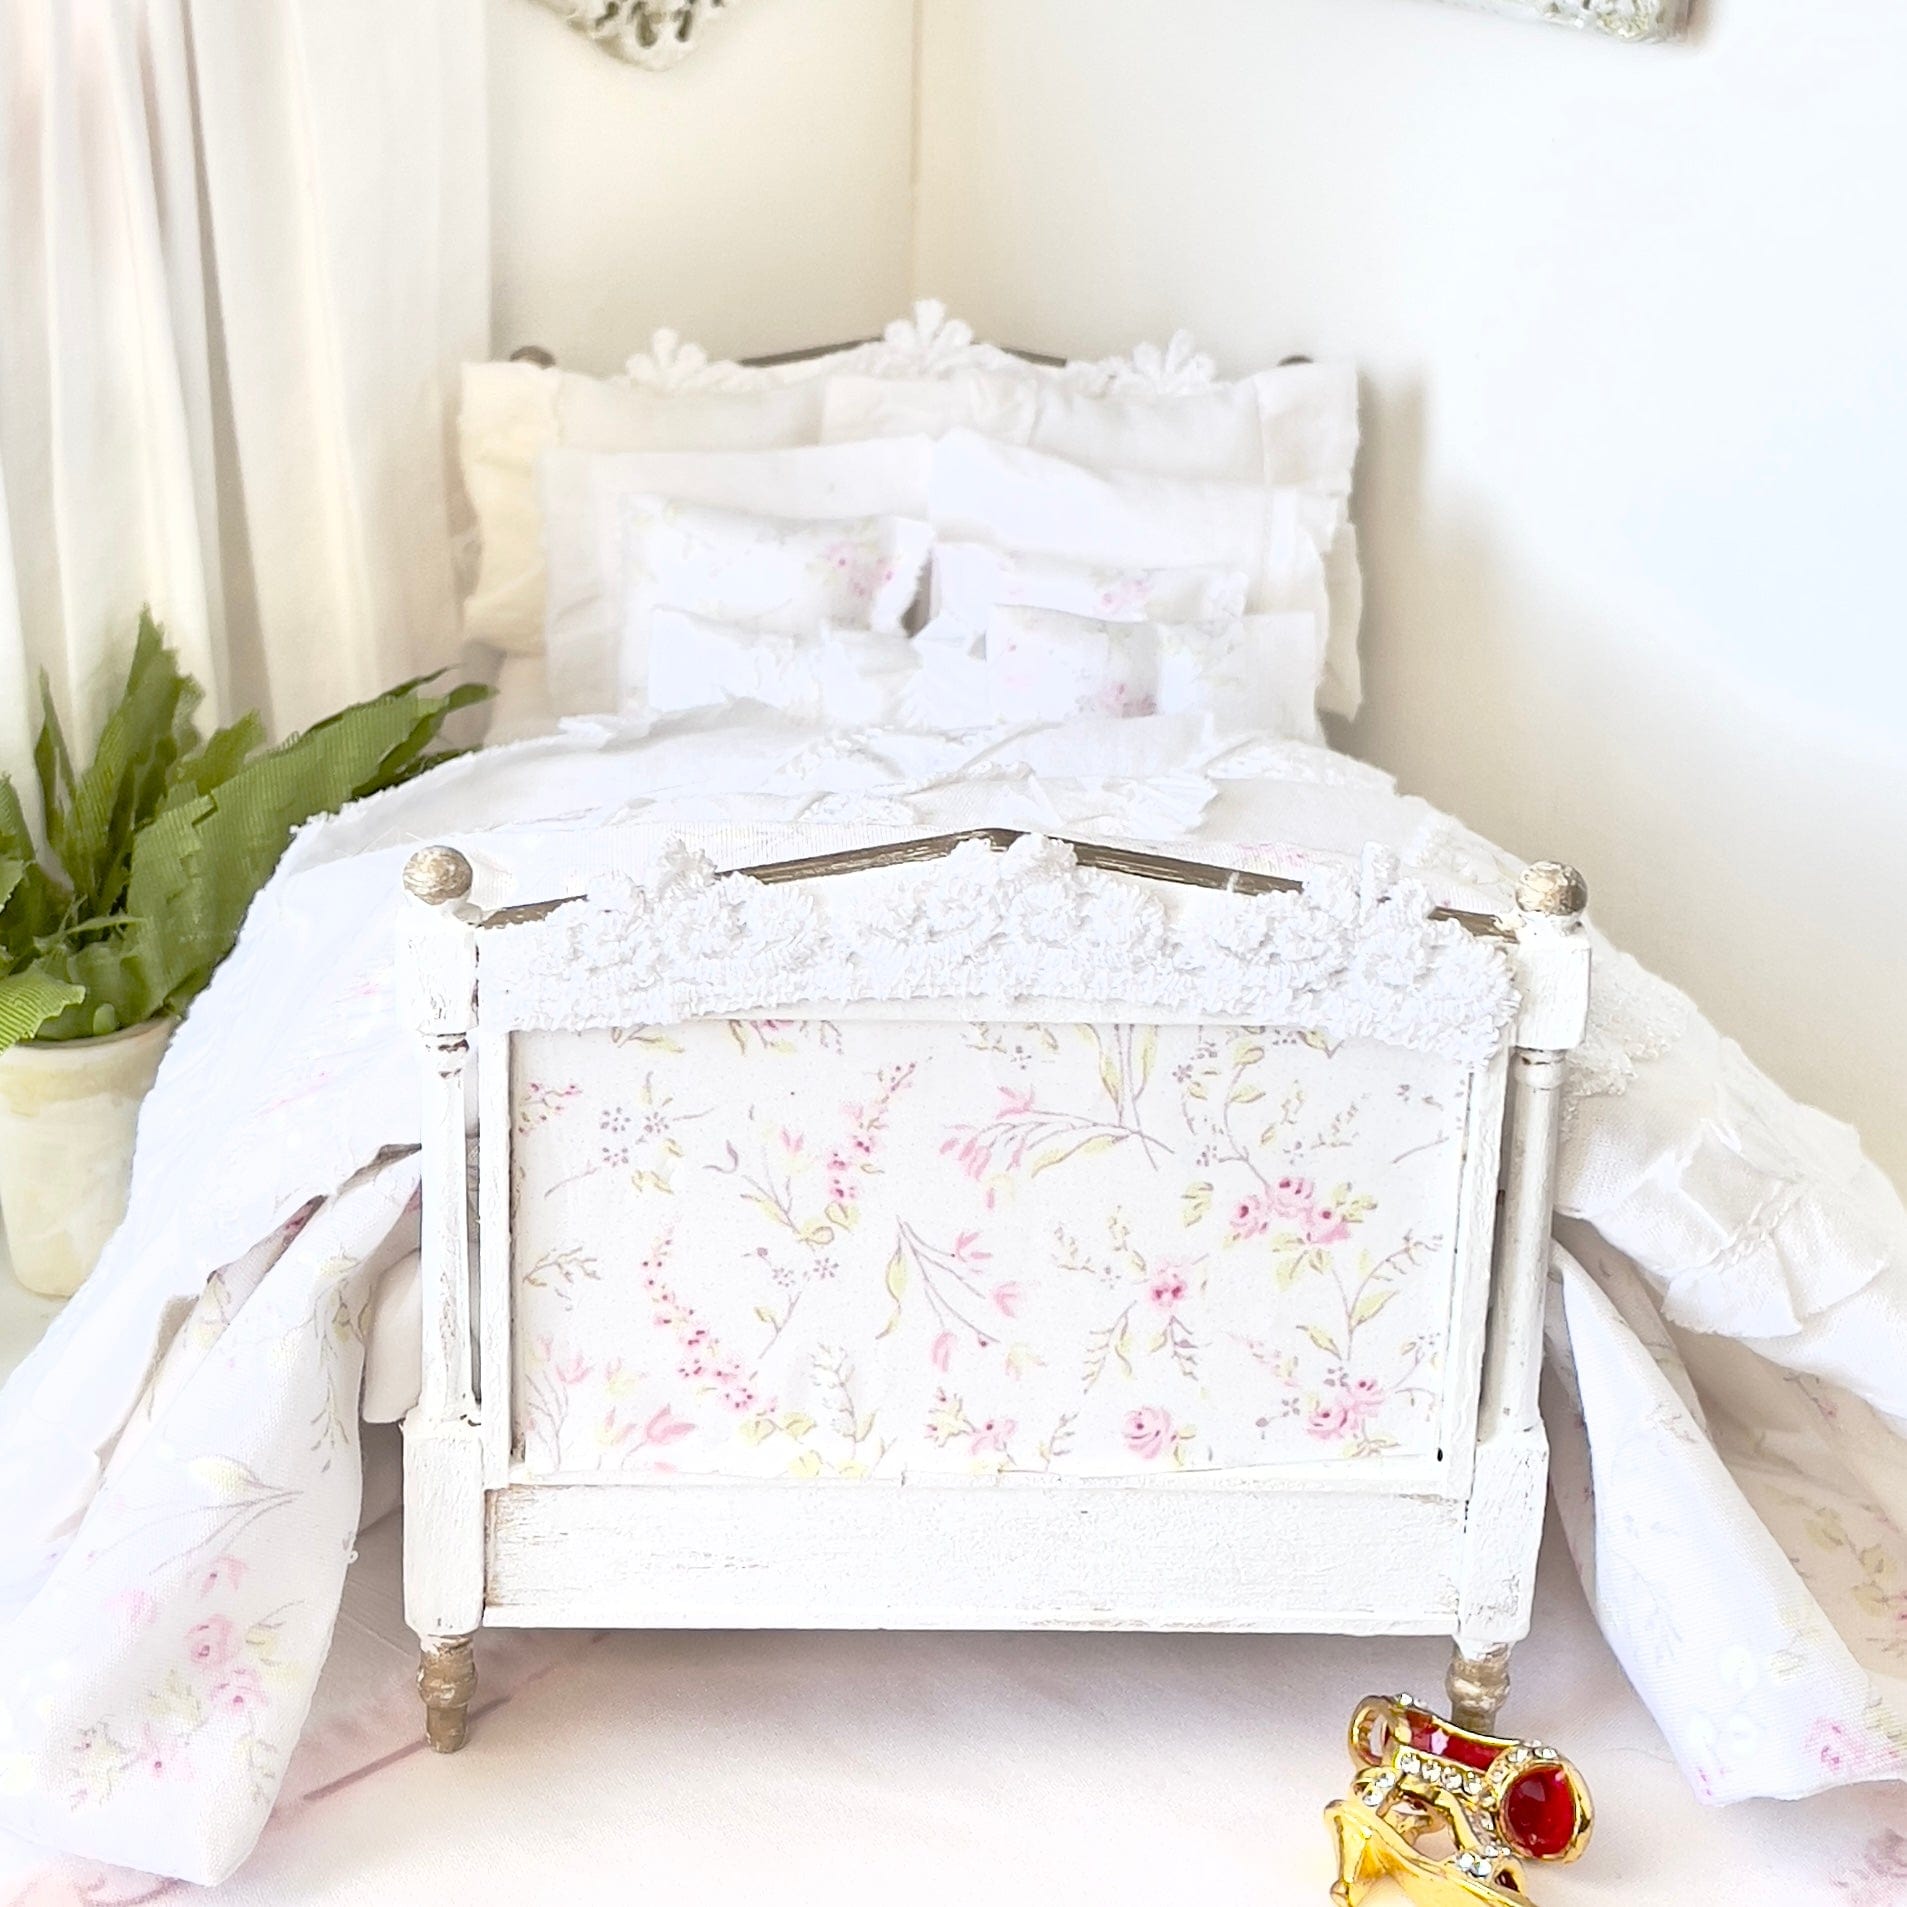 Chantallena Doll House Camila| Decoupage Shabby Pink Wildflowers Wooden Bed with Lace Accents